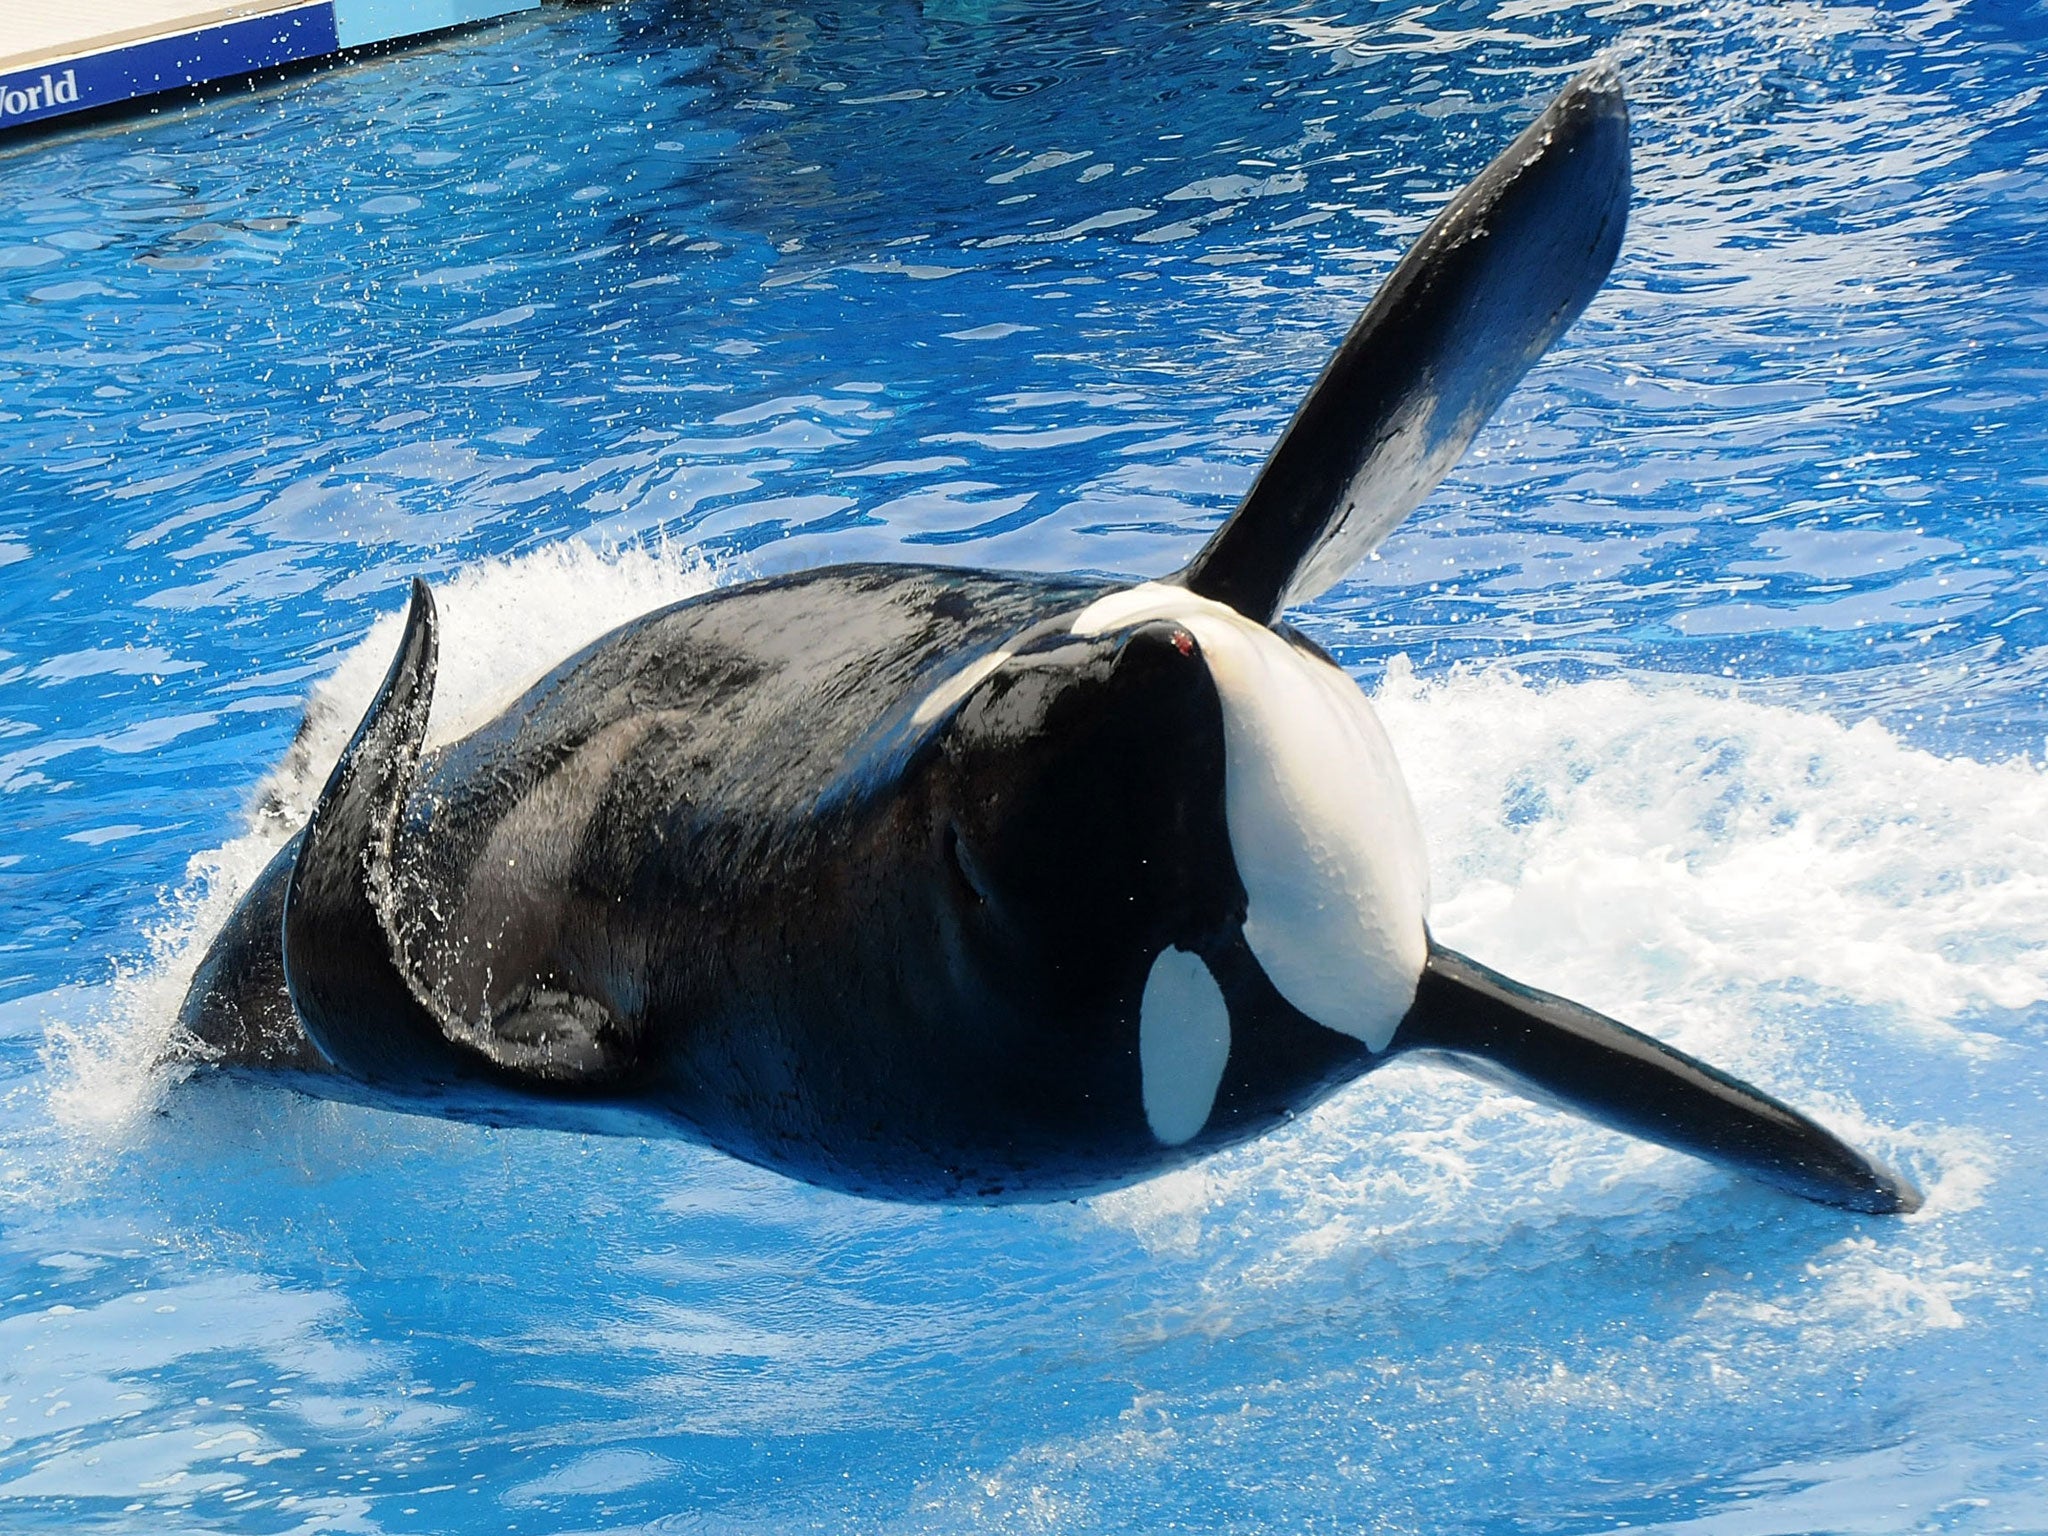 Killer whale 'Tilikum' appears during a performance at SeaWorld in Orlando, Florida. '